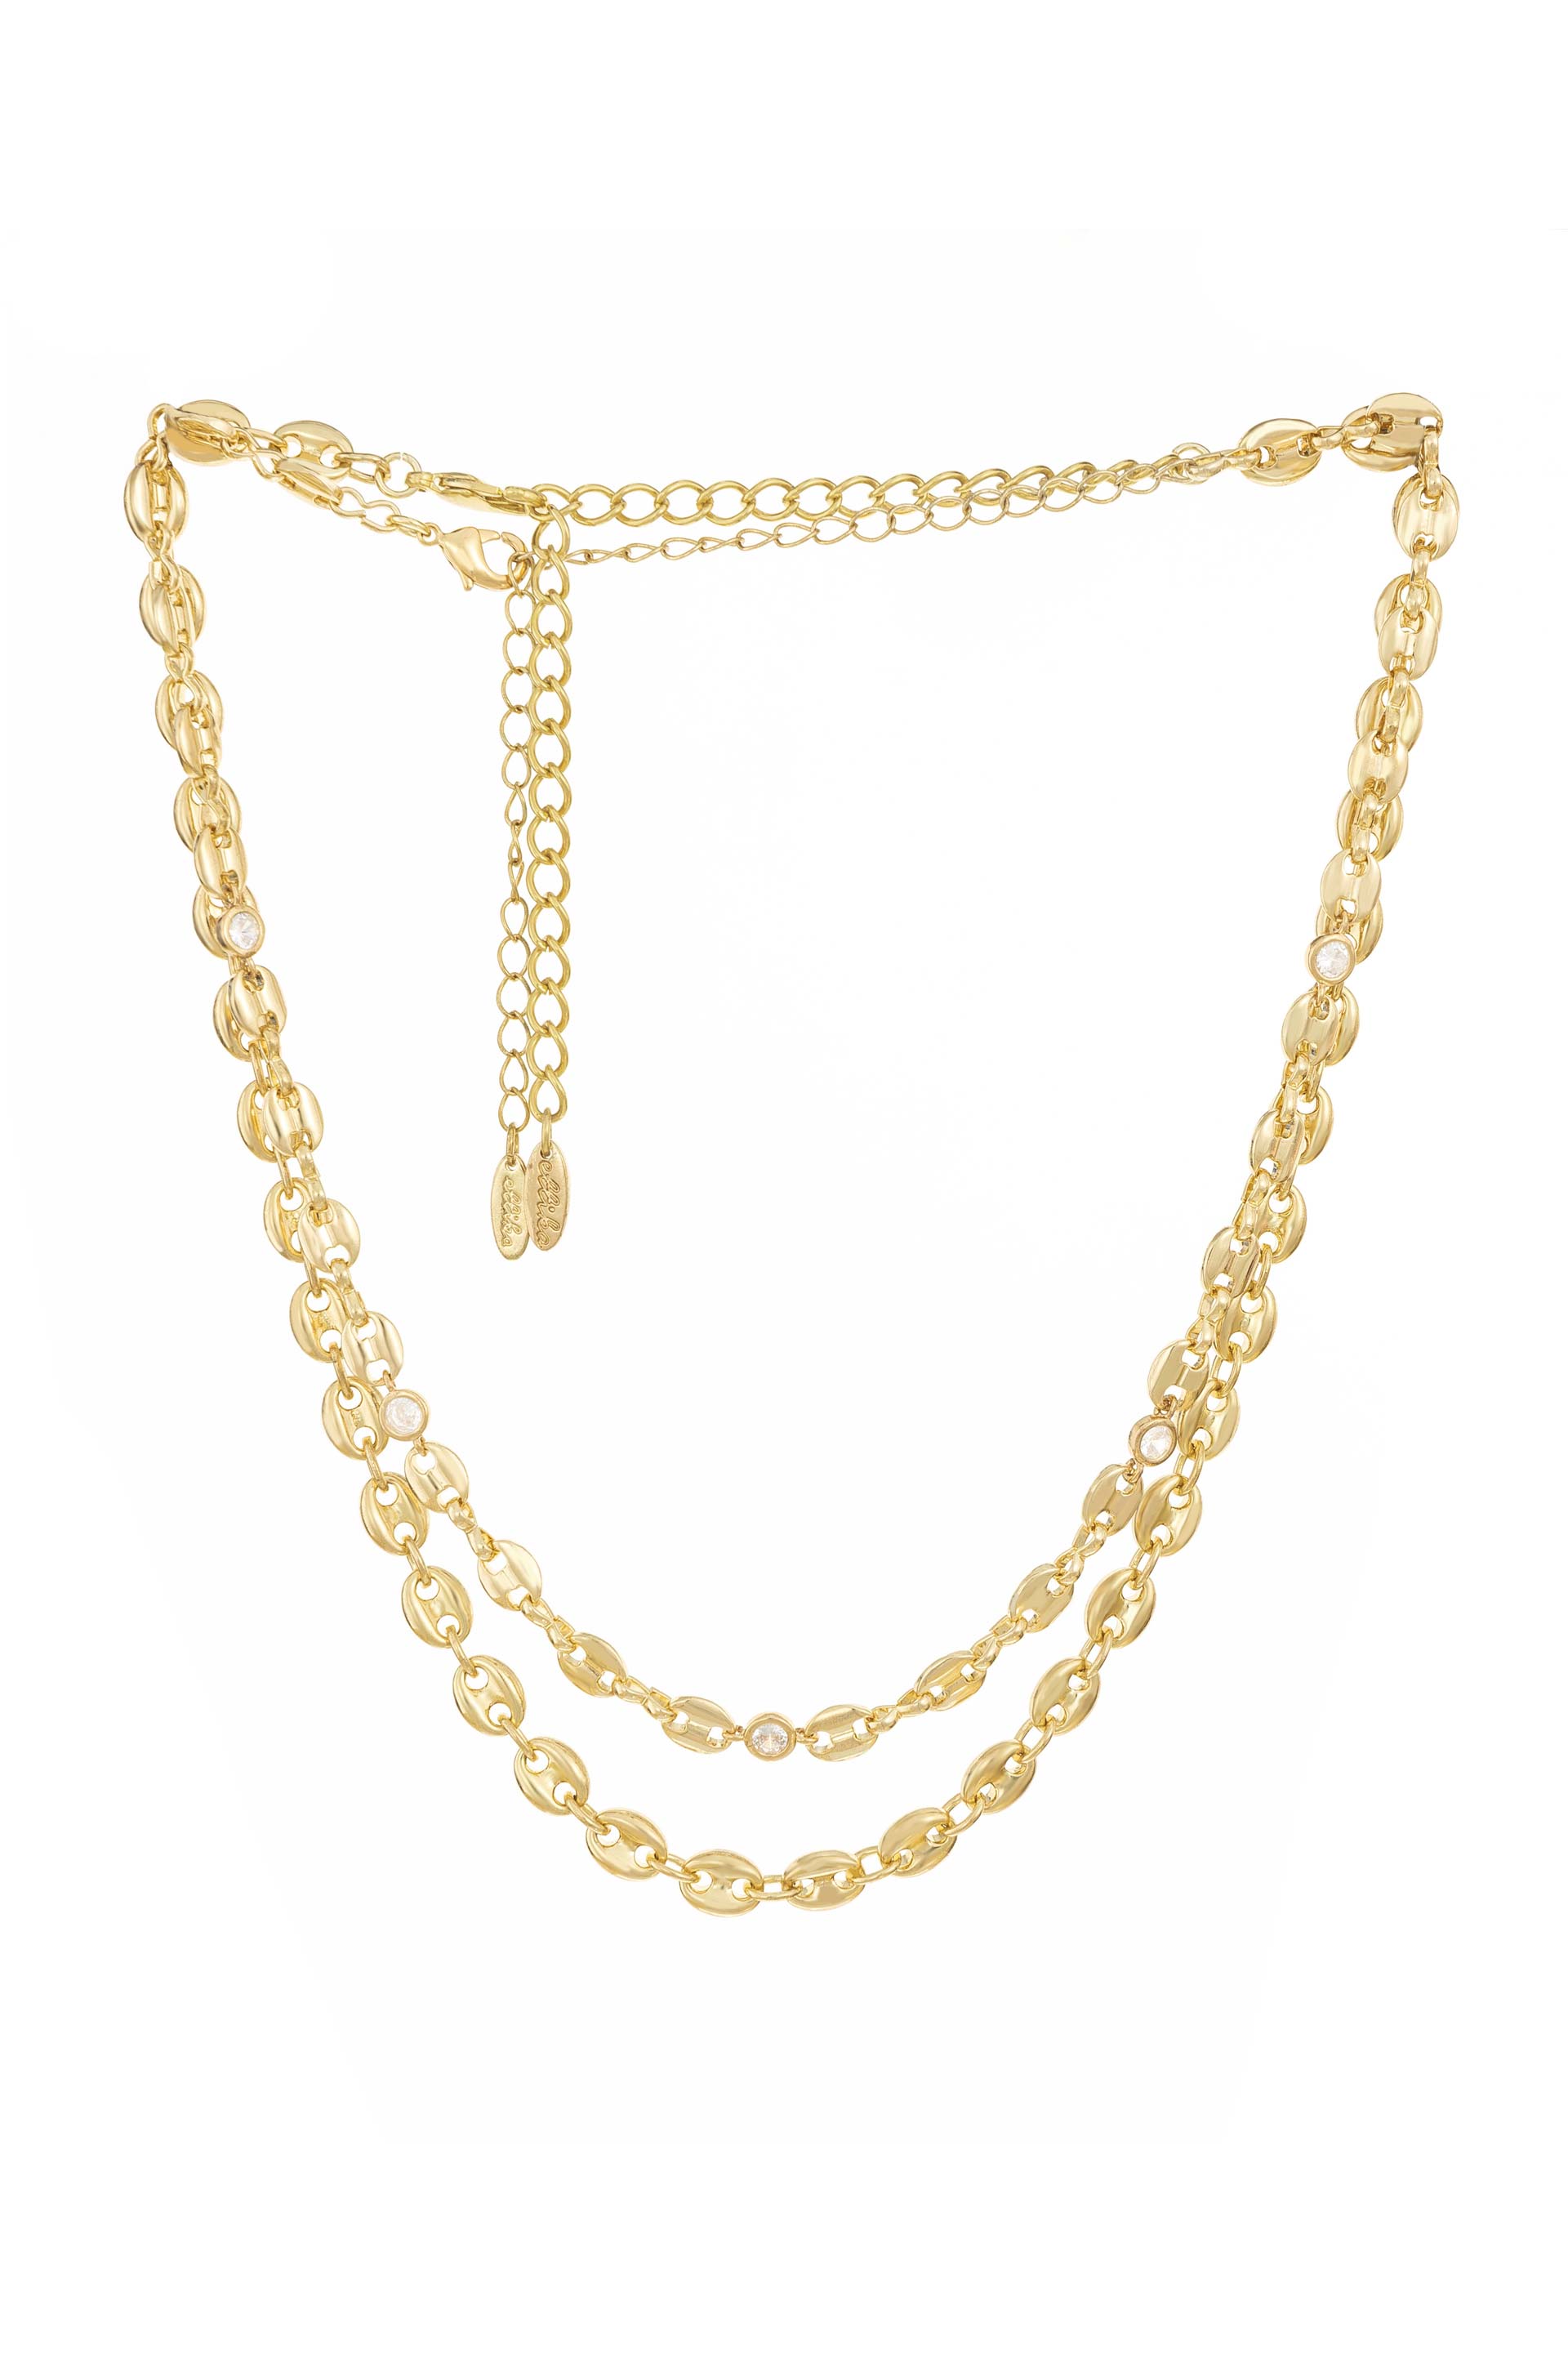 West Coast Sunset 18k Gold Plated Double Chain Necklace on white background 2